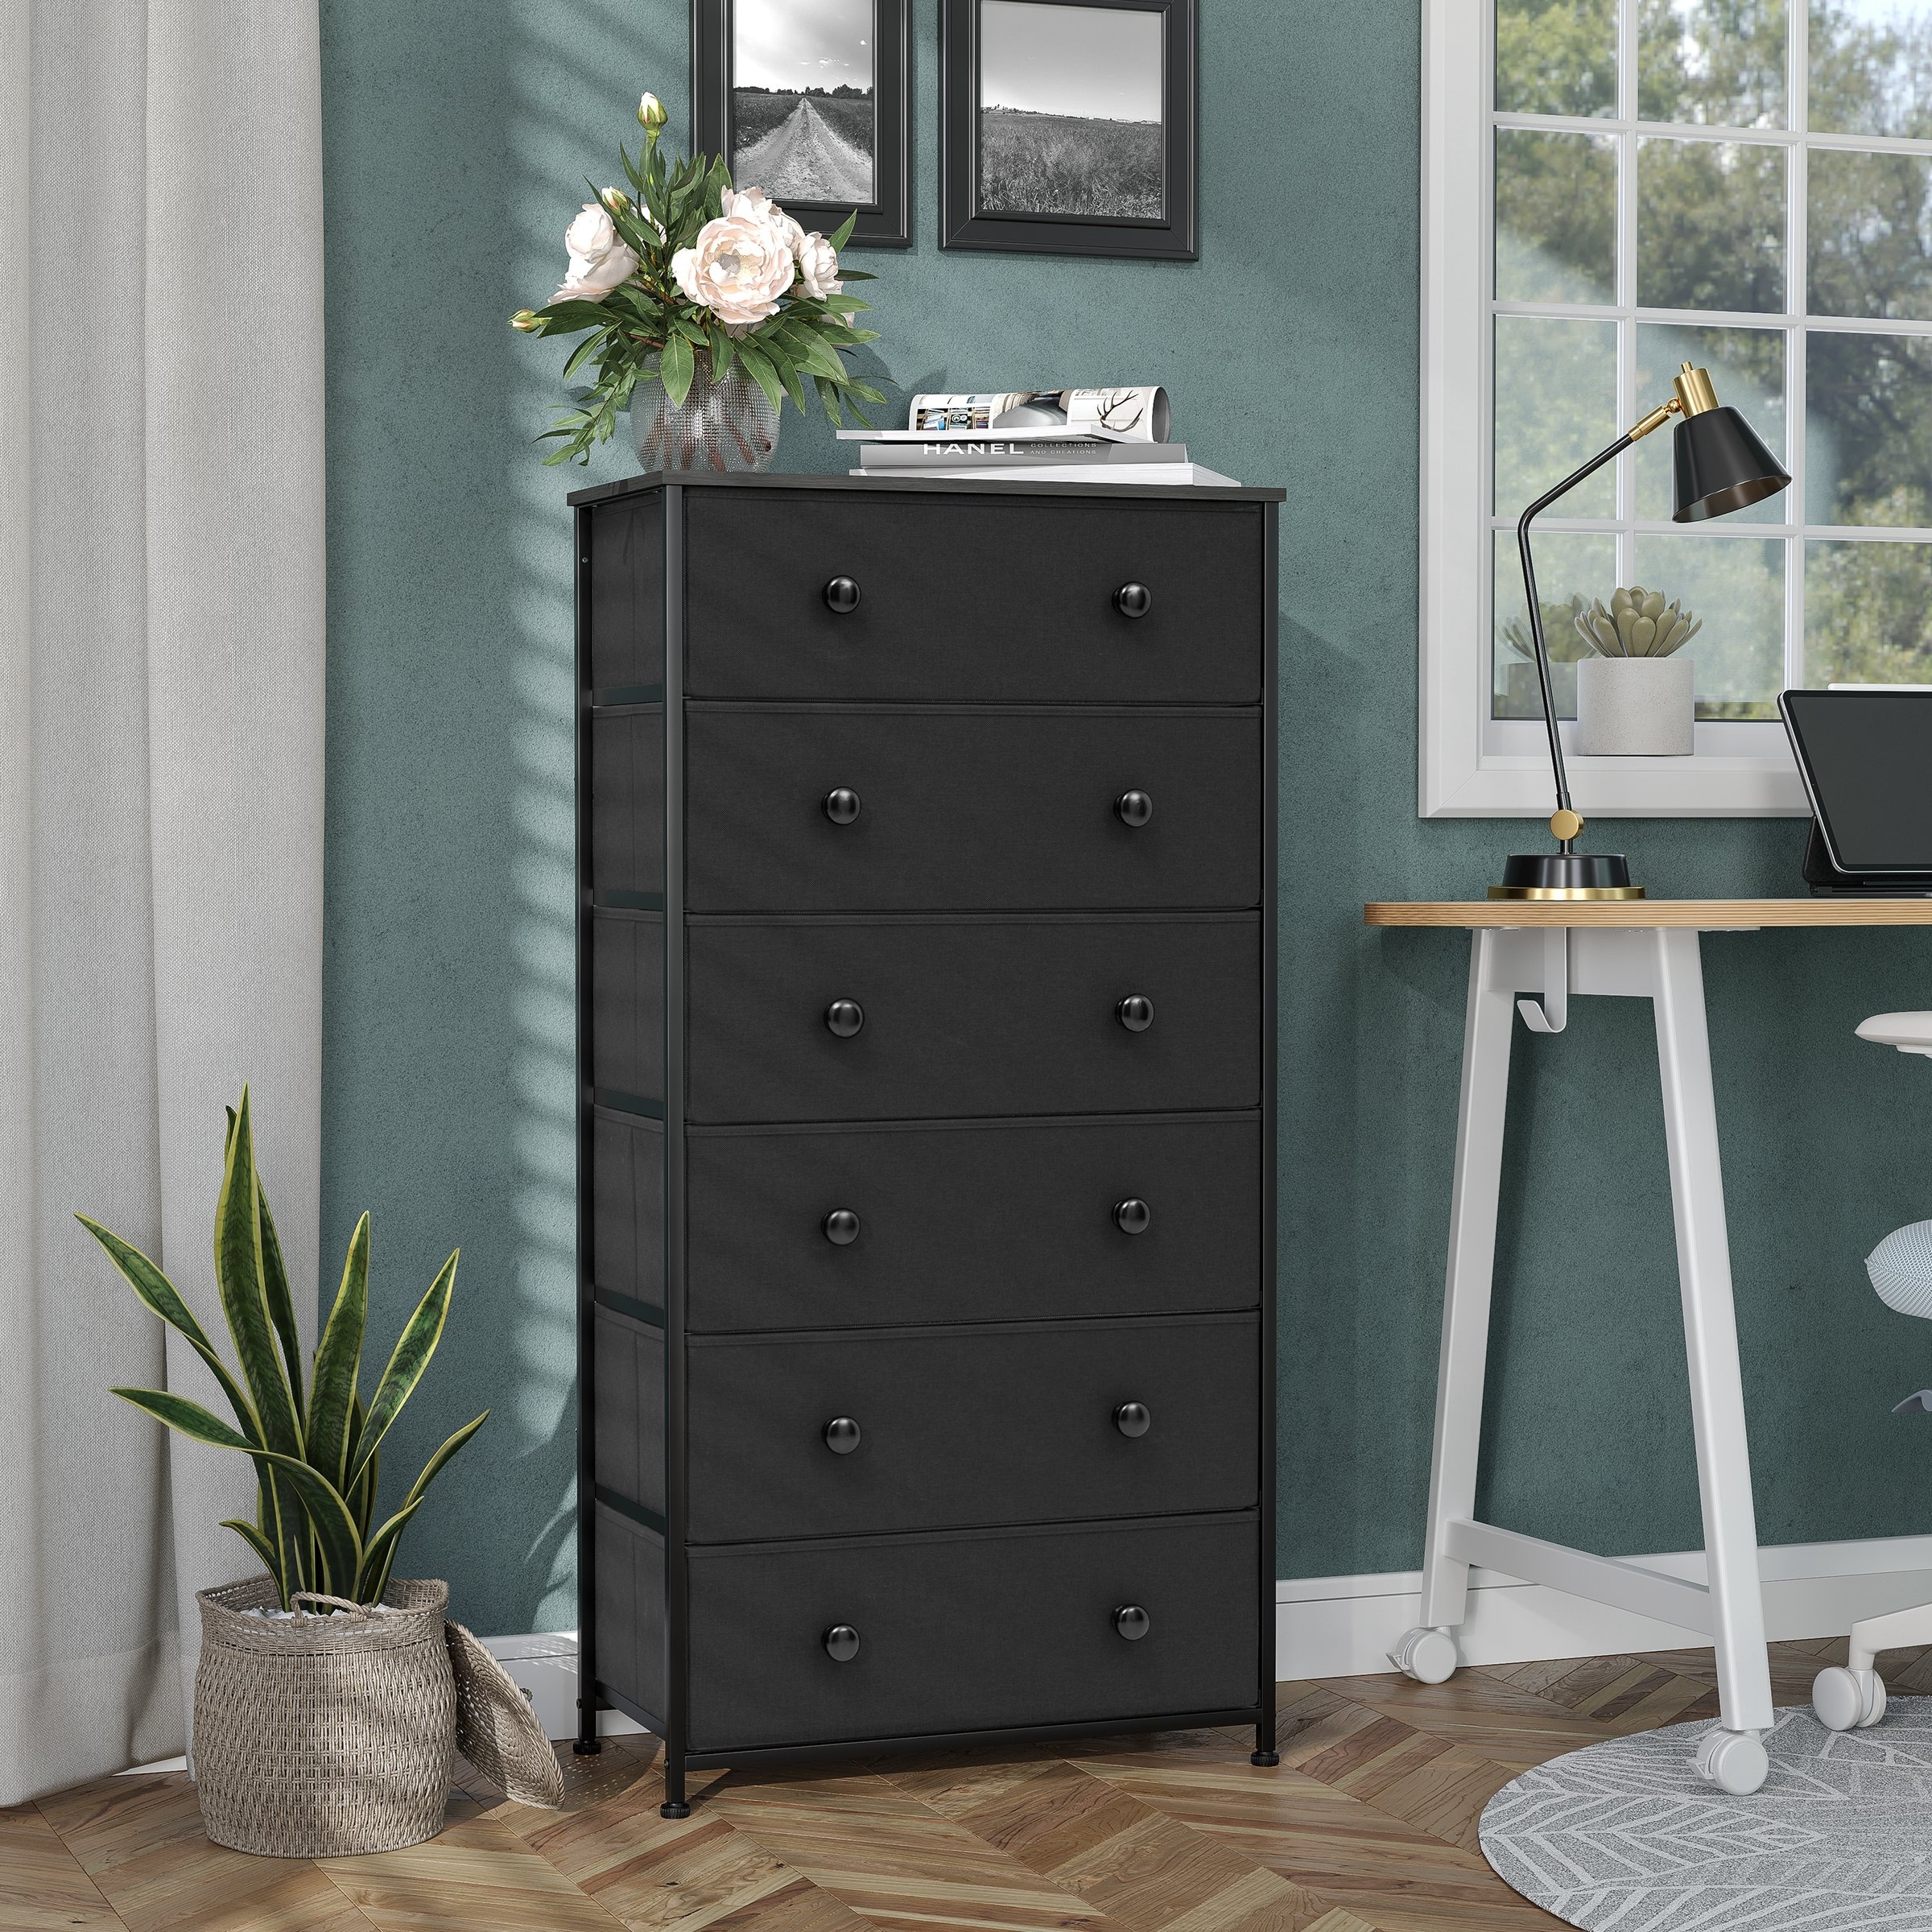 https://ak1.ostkcdn.com/images/products/is/images/direct/3ca62aaba41de7eae10e82b673a183c9624116f0/6-Drawer-Chest-Tall-Fabric-Dresser-for-Bedroom-Chest-of-Drawers-Storage-Organizer-Unit-with-Fabric-Bins.jpg